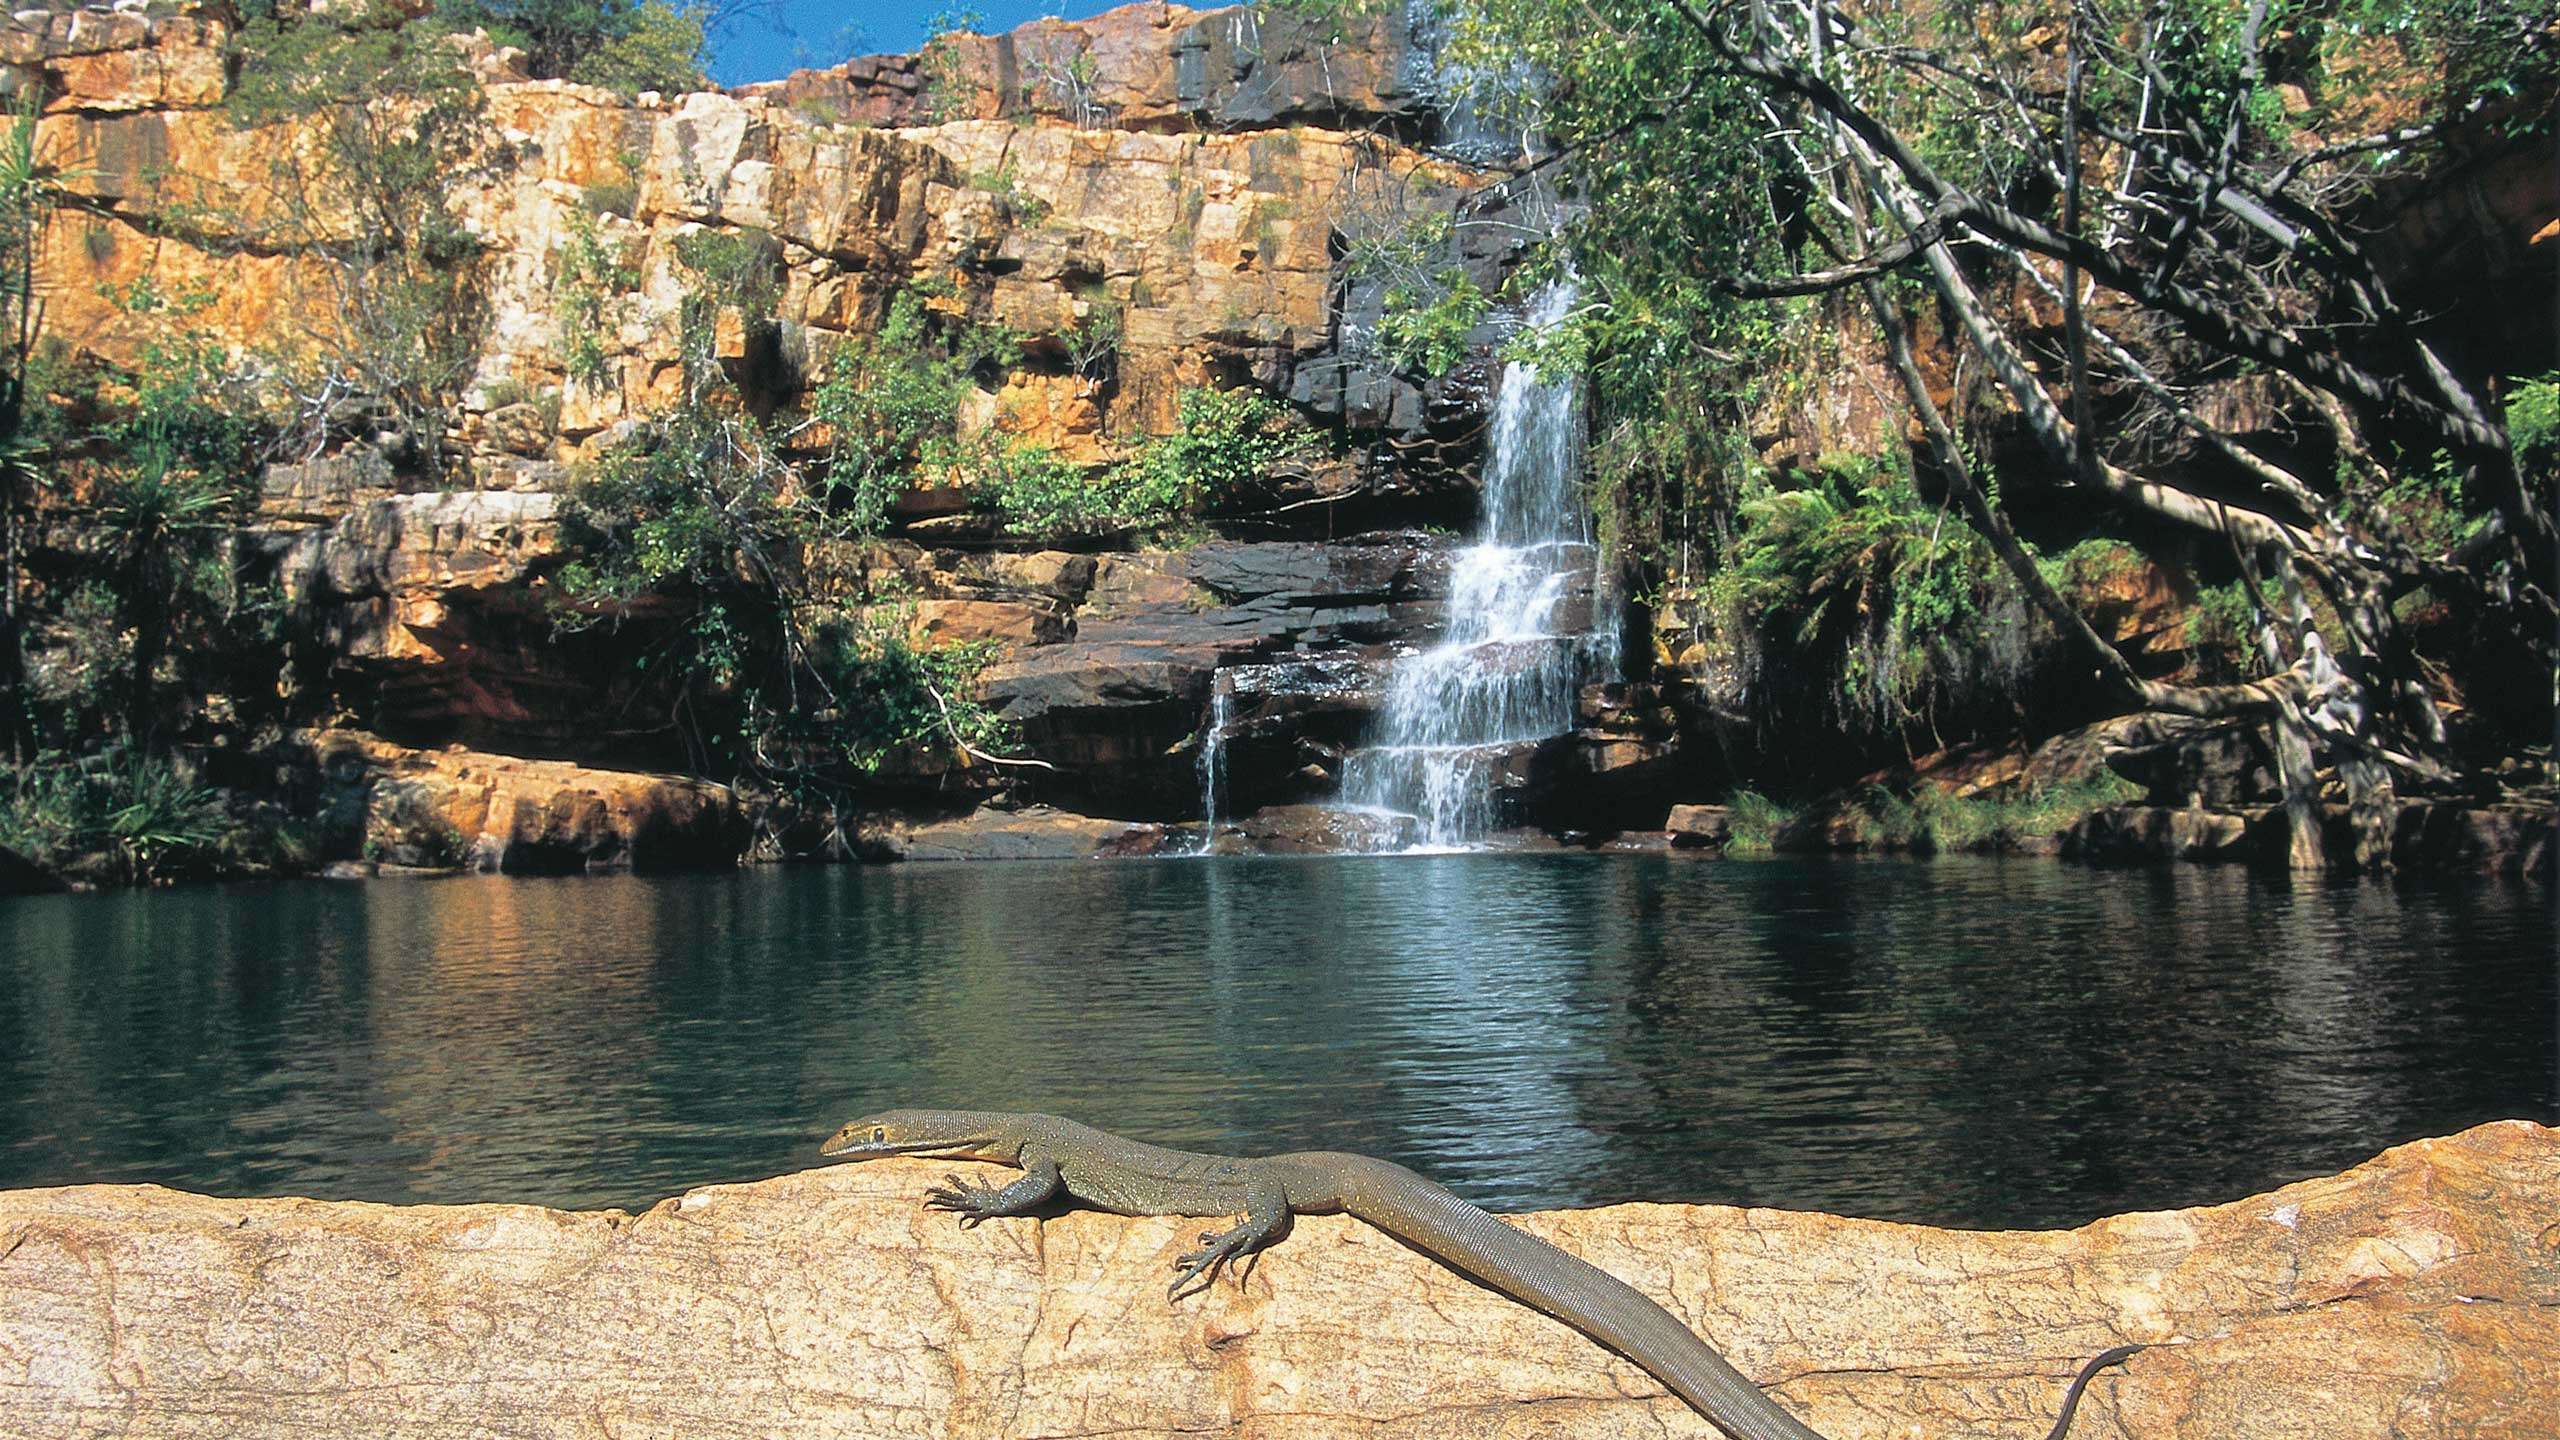 Wild Kimberley Loop Trail incl. Mitchell Plateau 14D13N (Broome - Broome), Fully Guided & Camping in Comfort